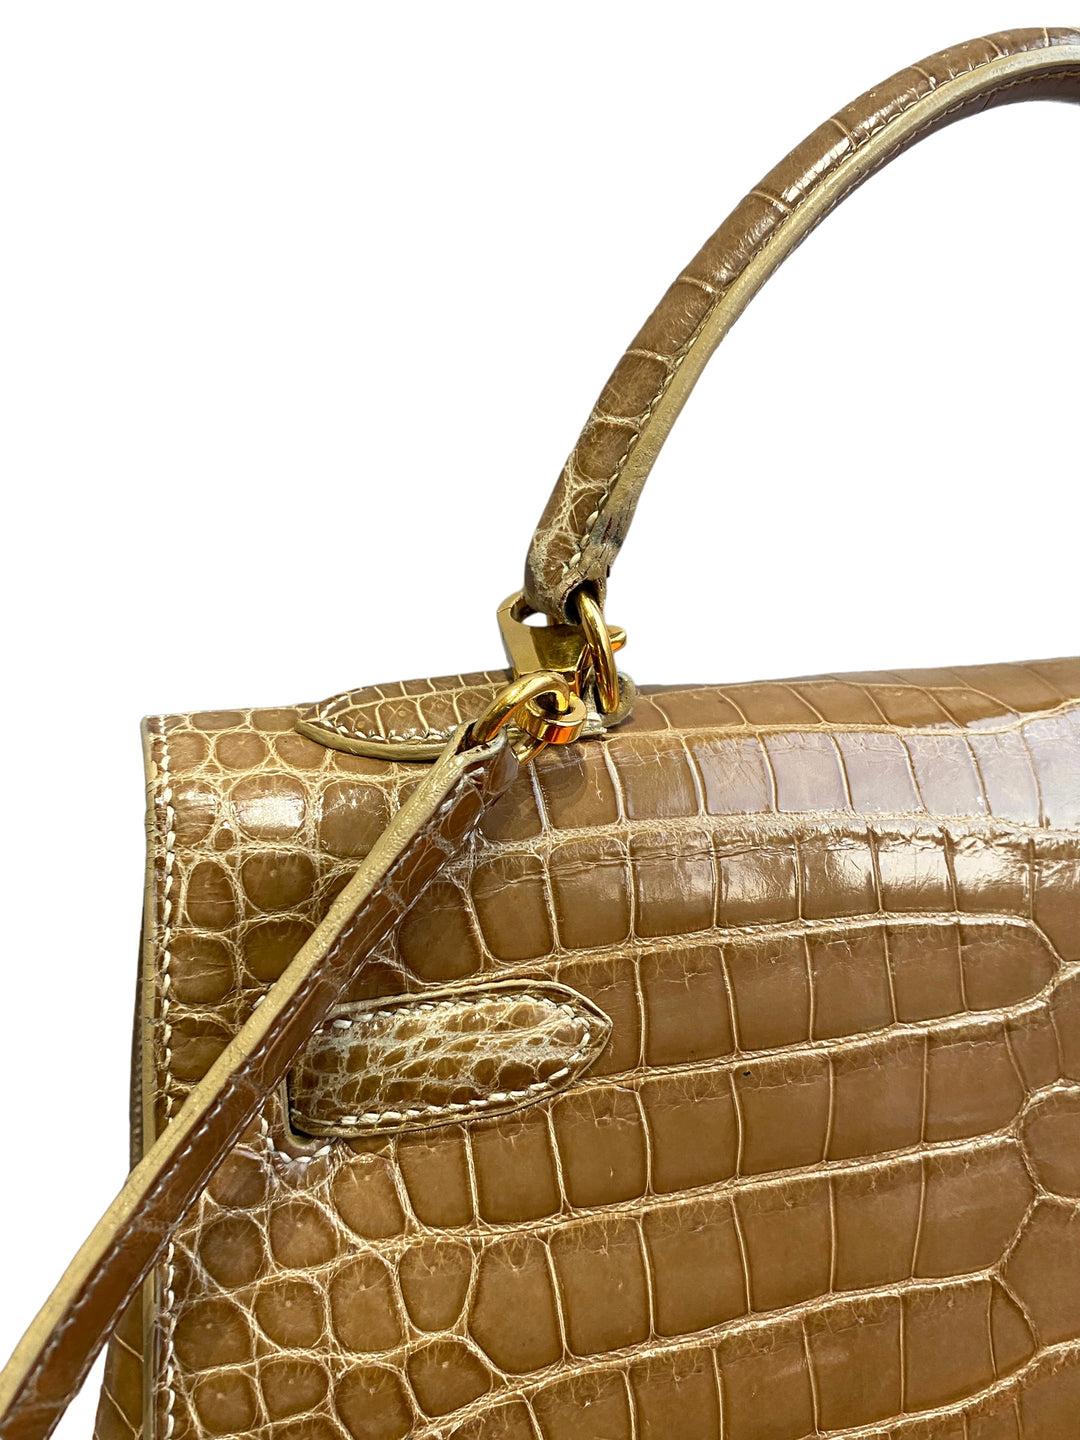 Hermes Kelly Porosus Crocodile Handbag 32

Condition: Good Condition
Colour: light brown
Box : Yes

This Hermes Kelly Porosus Crocodile Handbag 32 is a stunning and elegant piece that is perfect for any occasion. Made from high-quality porosus